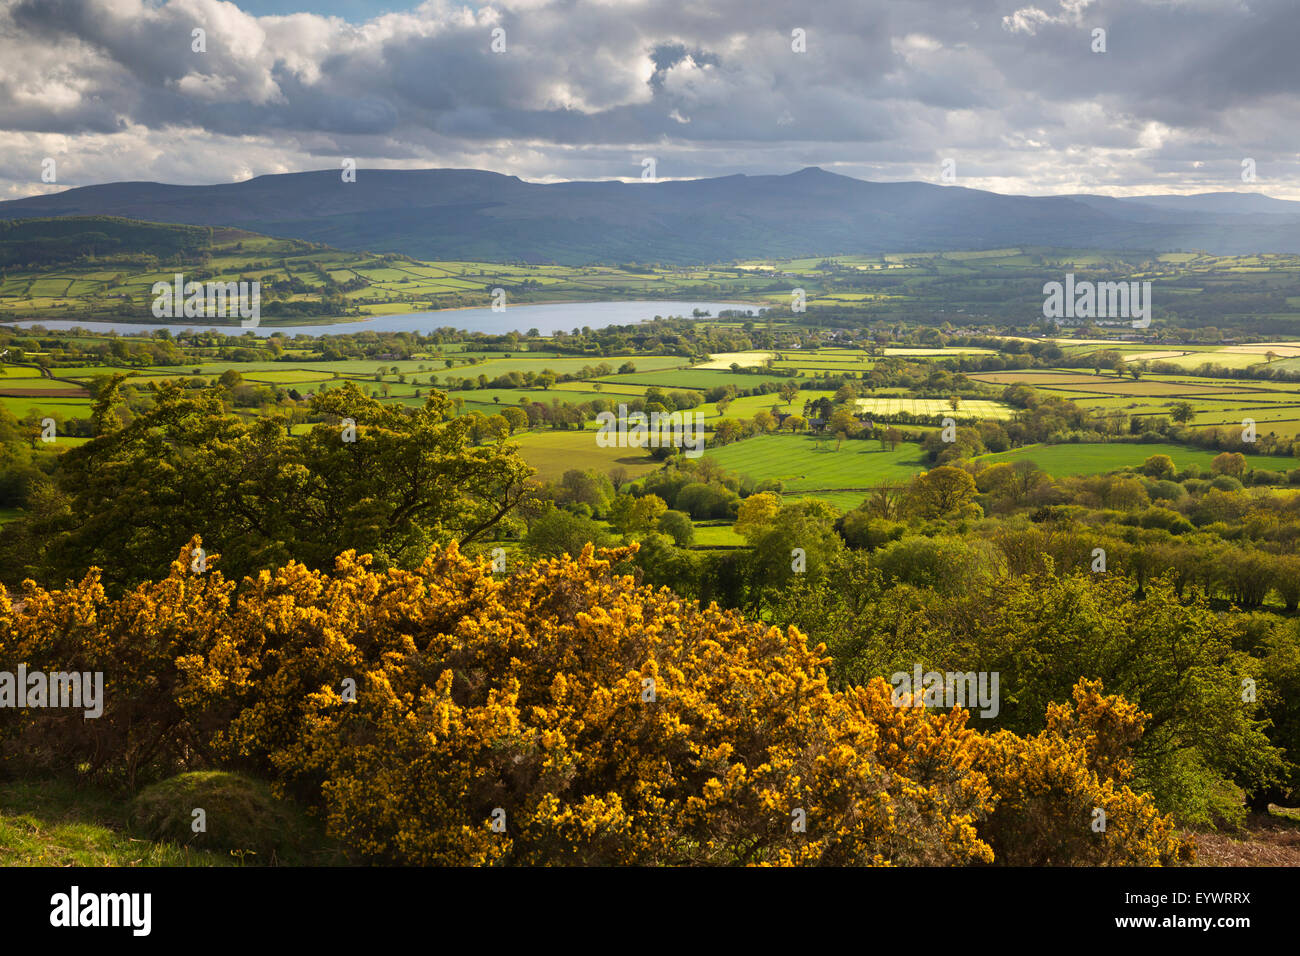 View over Llangorse Lake to Pen Y Fan from Mynydd Troed, Llangorse, Brecon Beacons National Park, Powys, Wales, United Kingdom Stock Photo